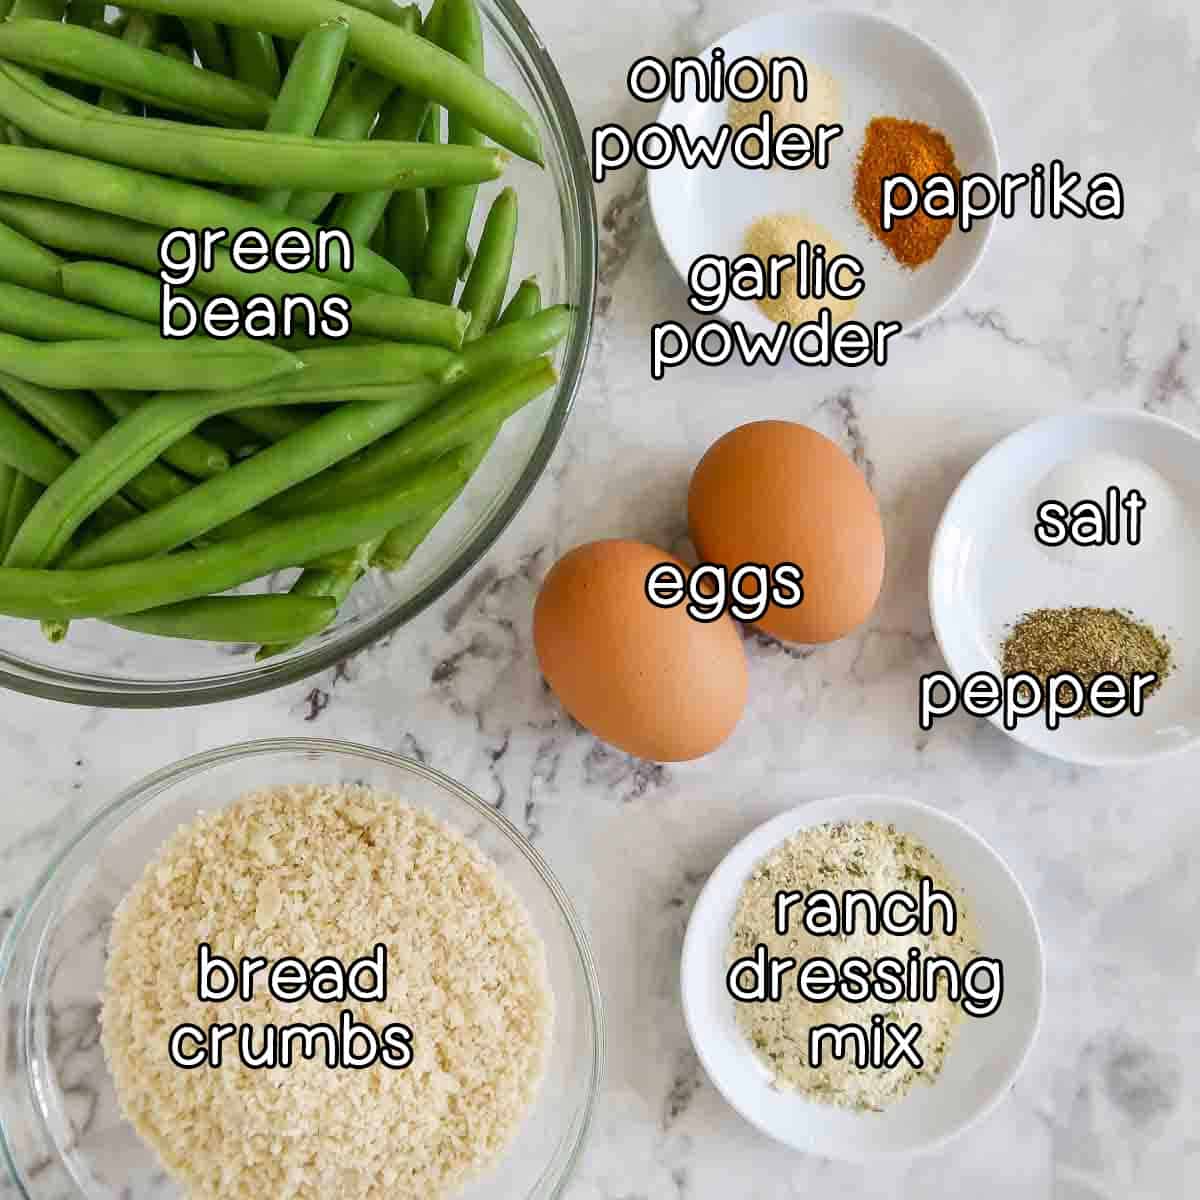 Overhead shot of ingredients- green beans, eggs, bread crumbs, ranch dressing mix, salt and pepper, onion powder, garlic powder, and paprika.